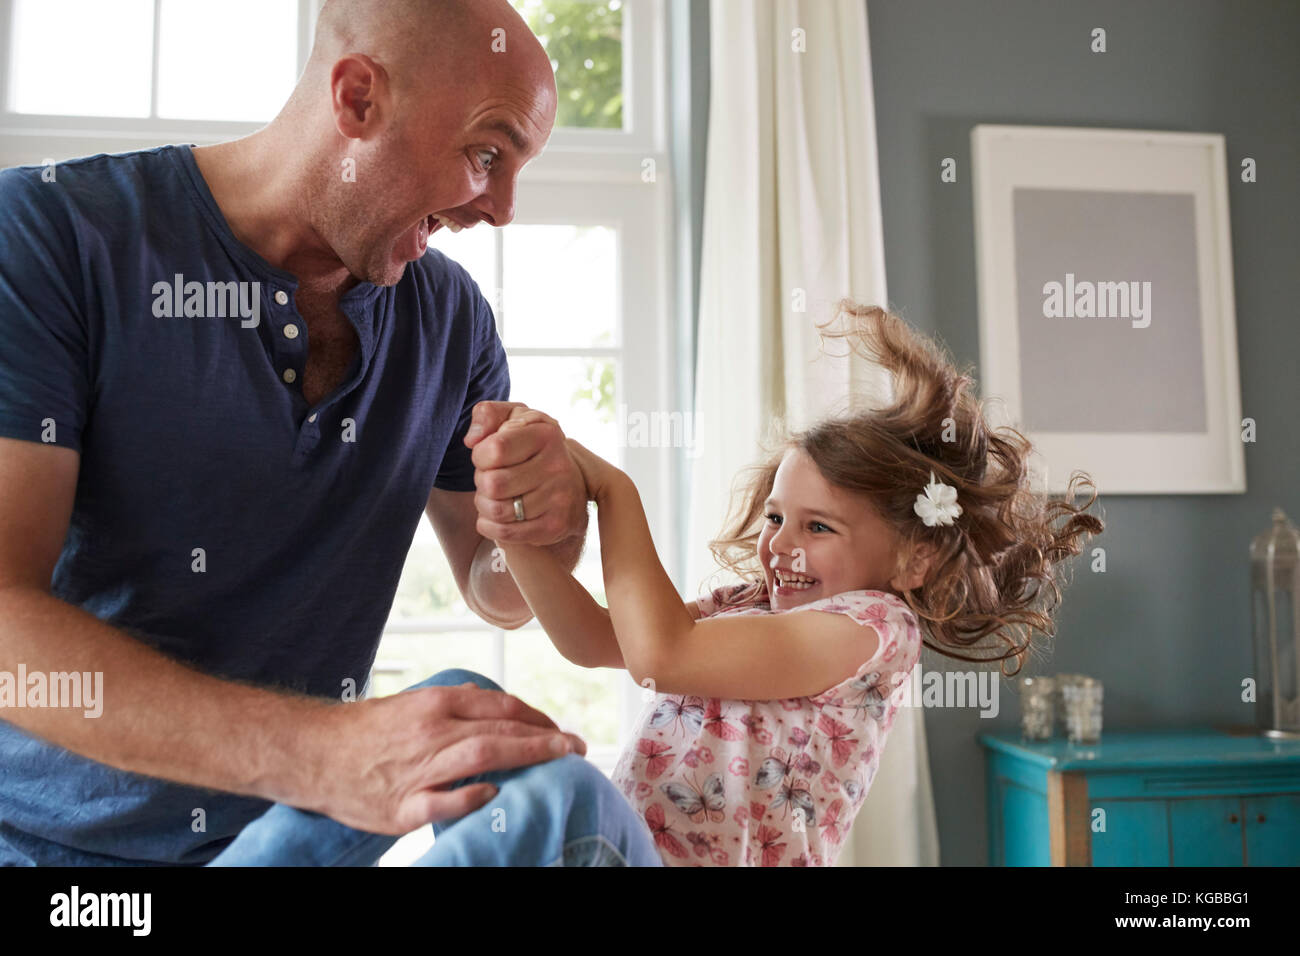 Father and daughter having fun jumping together at home Stock Photo